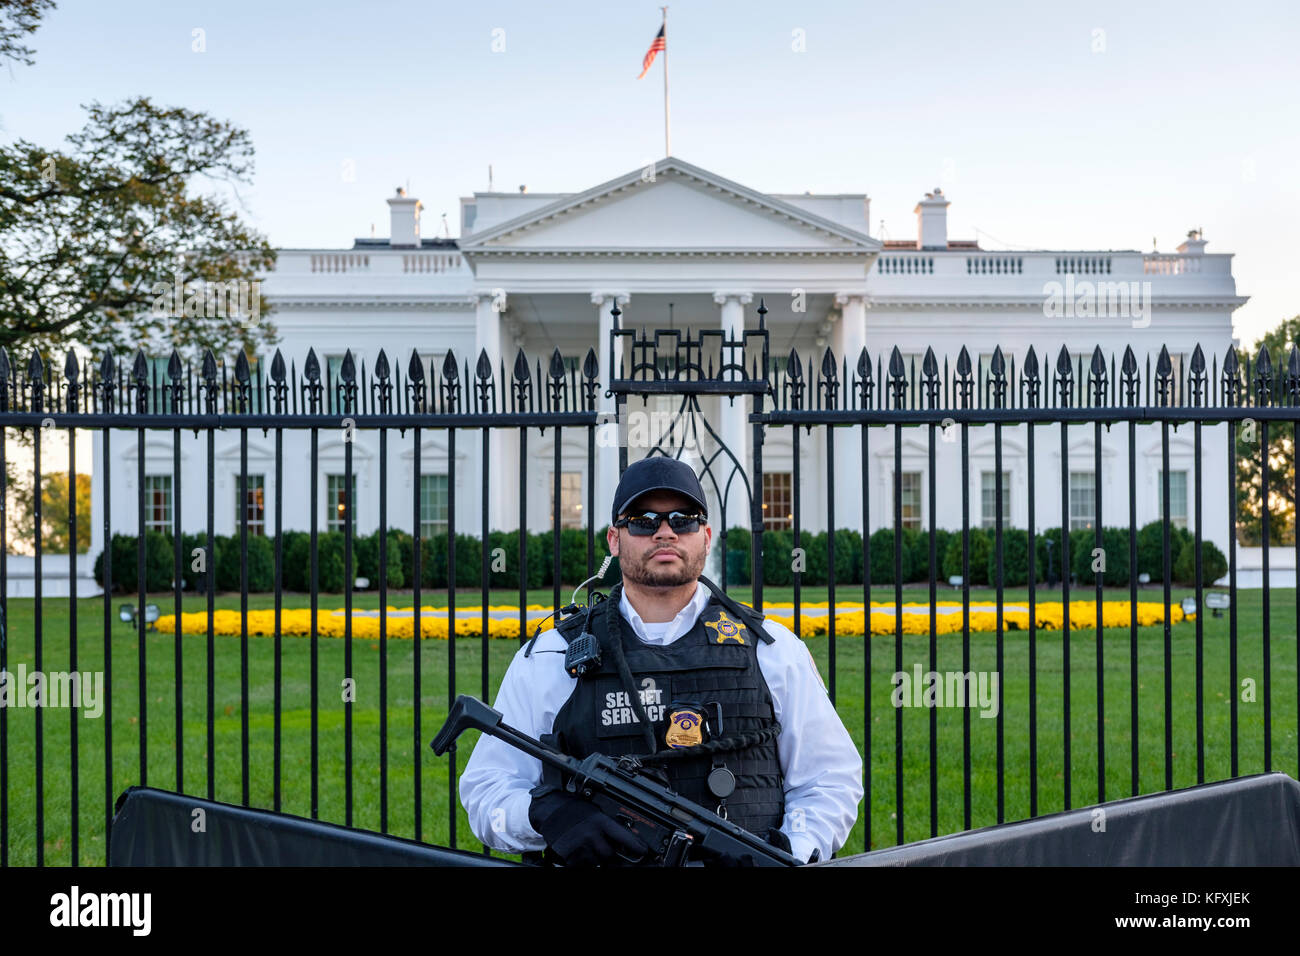 American Secret Service agent armed with a Heckler & Koch MP5 submachine gun standing behind a barricade in front of the White House in Washington, DC Stock Photo